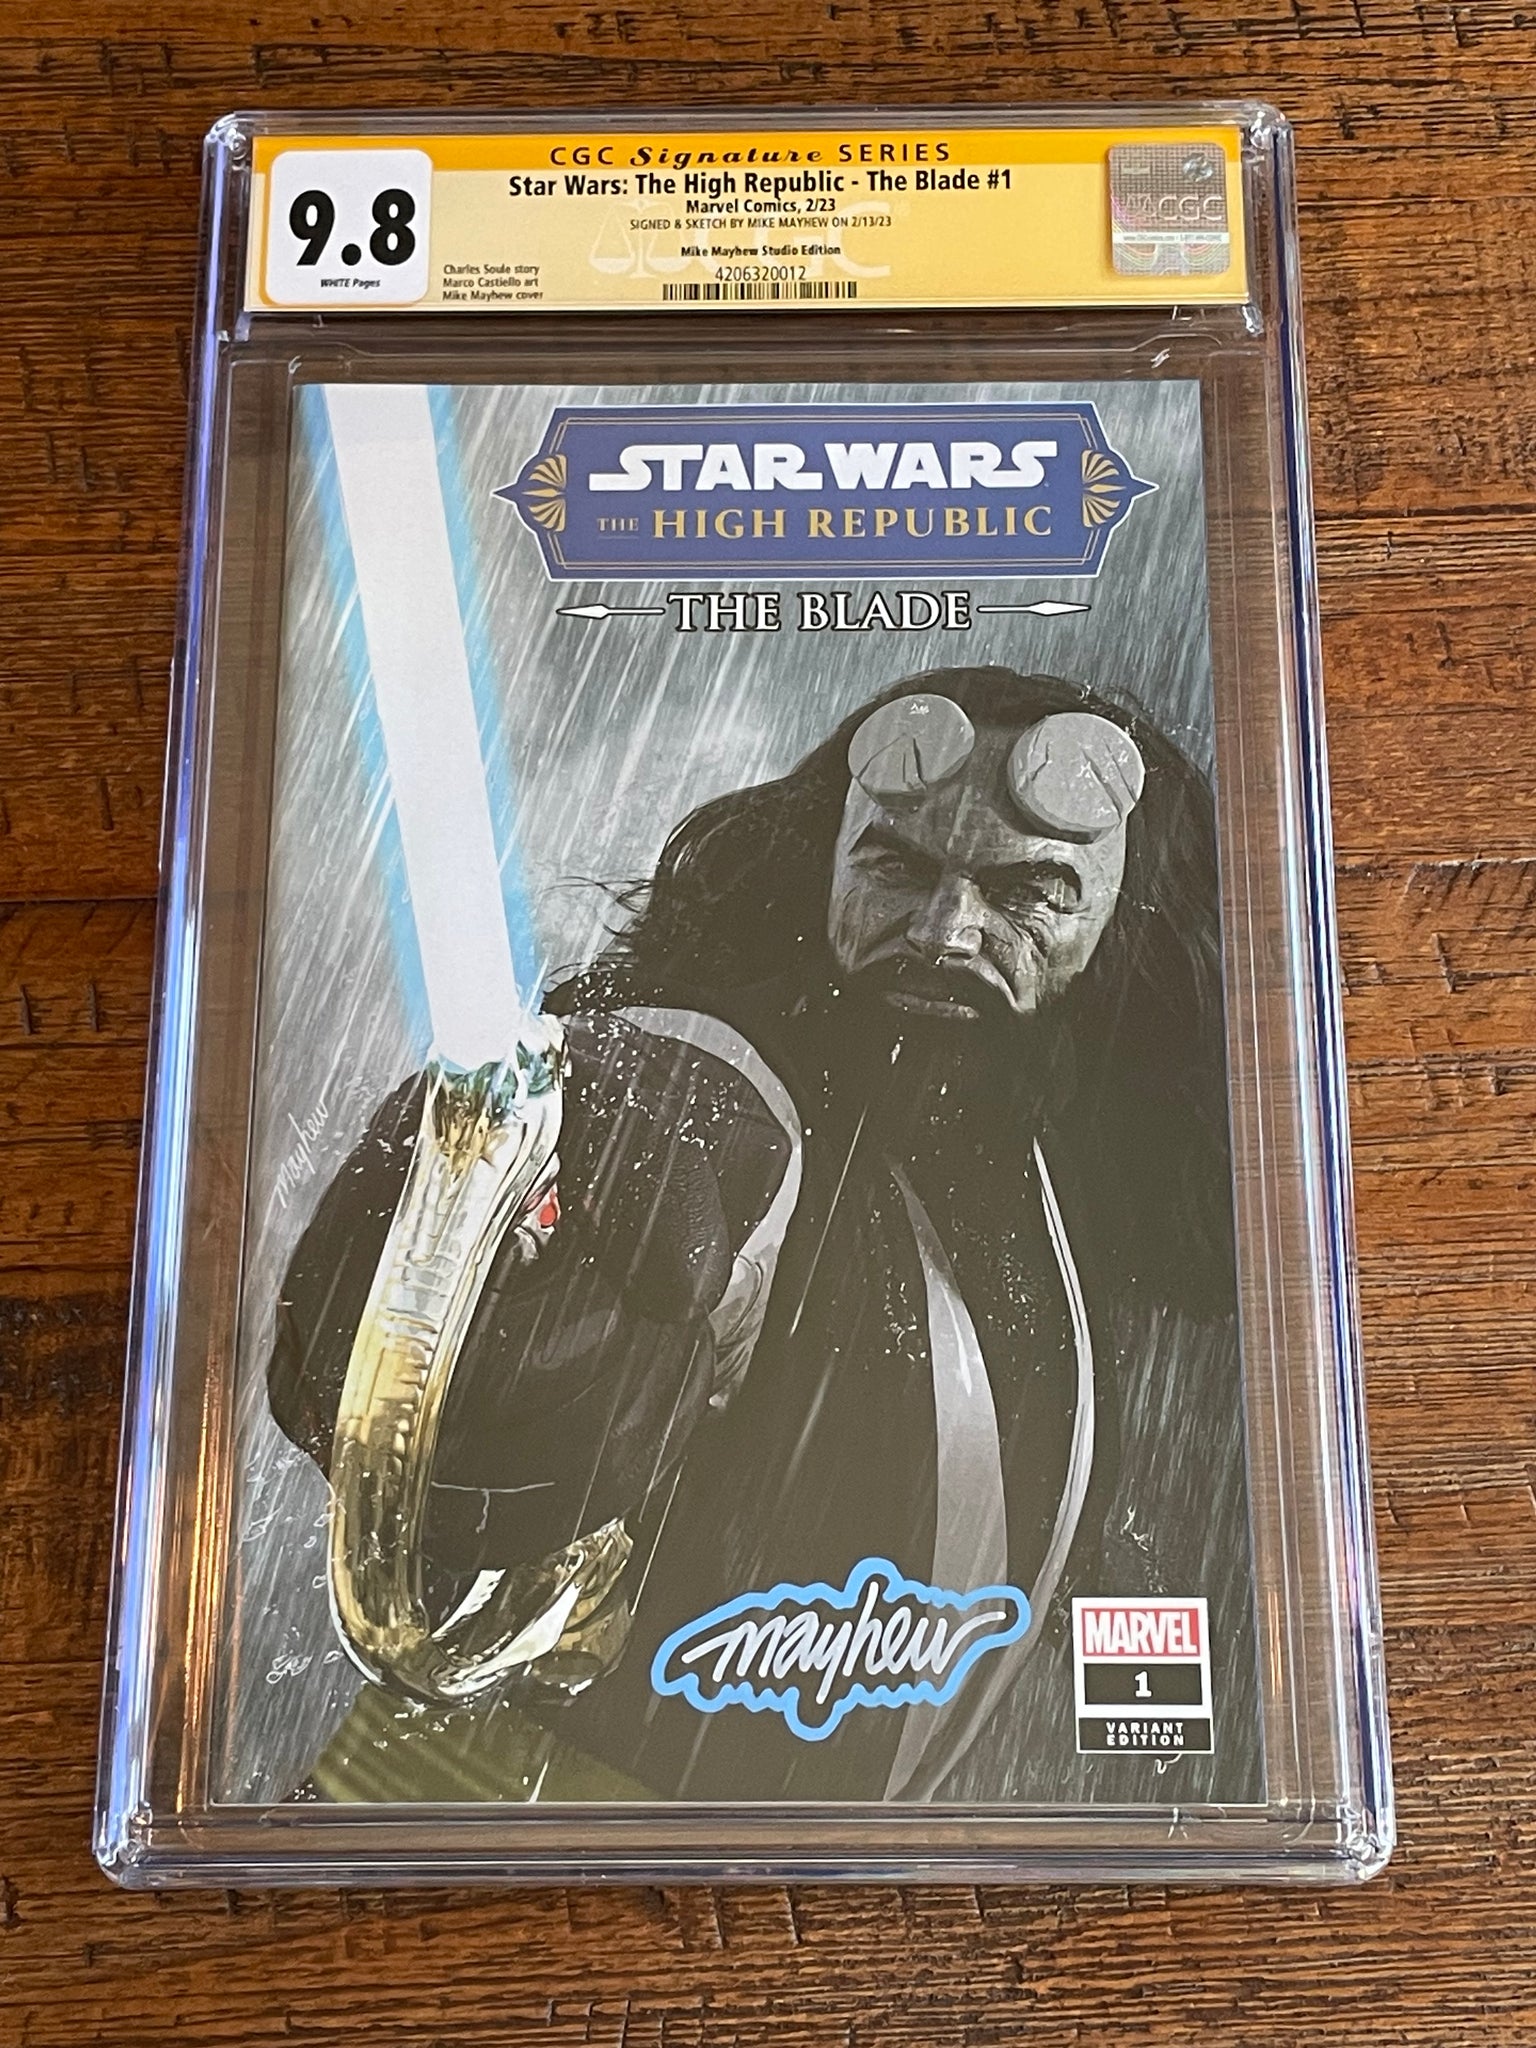 STAR WARS THE HIGH REPUBLIC: THE BLADE #1 CGC SS 9.8 MIKE MAYHEW SIGNED TRADE & VIRGIN VARIANT